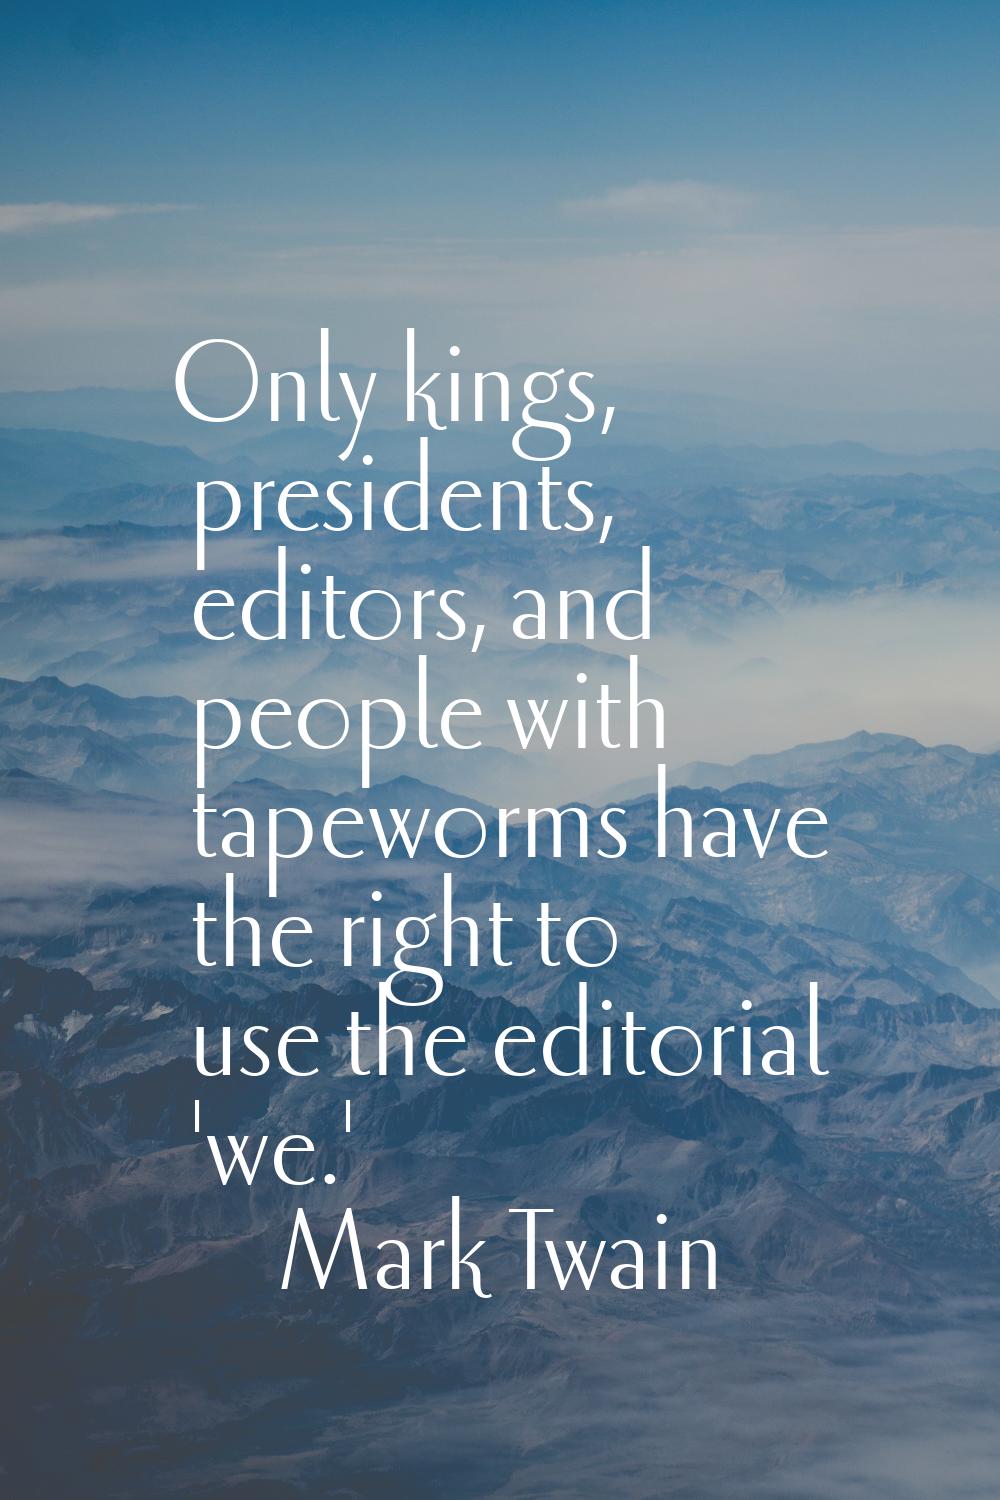 Only kings, presidents, editors, and people with tapeworms have the right to use the editorial 'we.